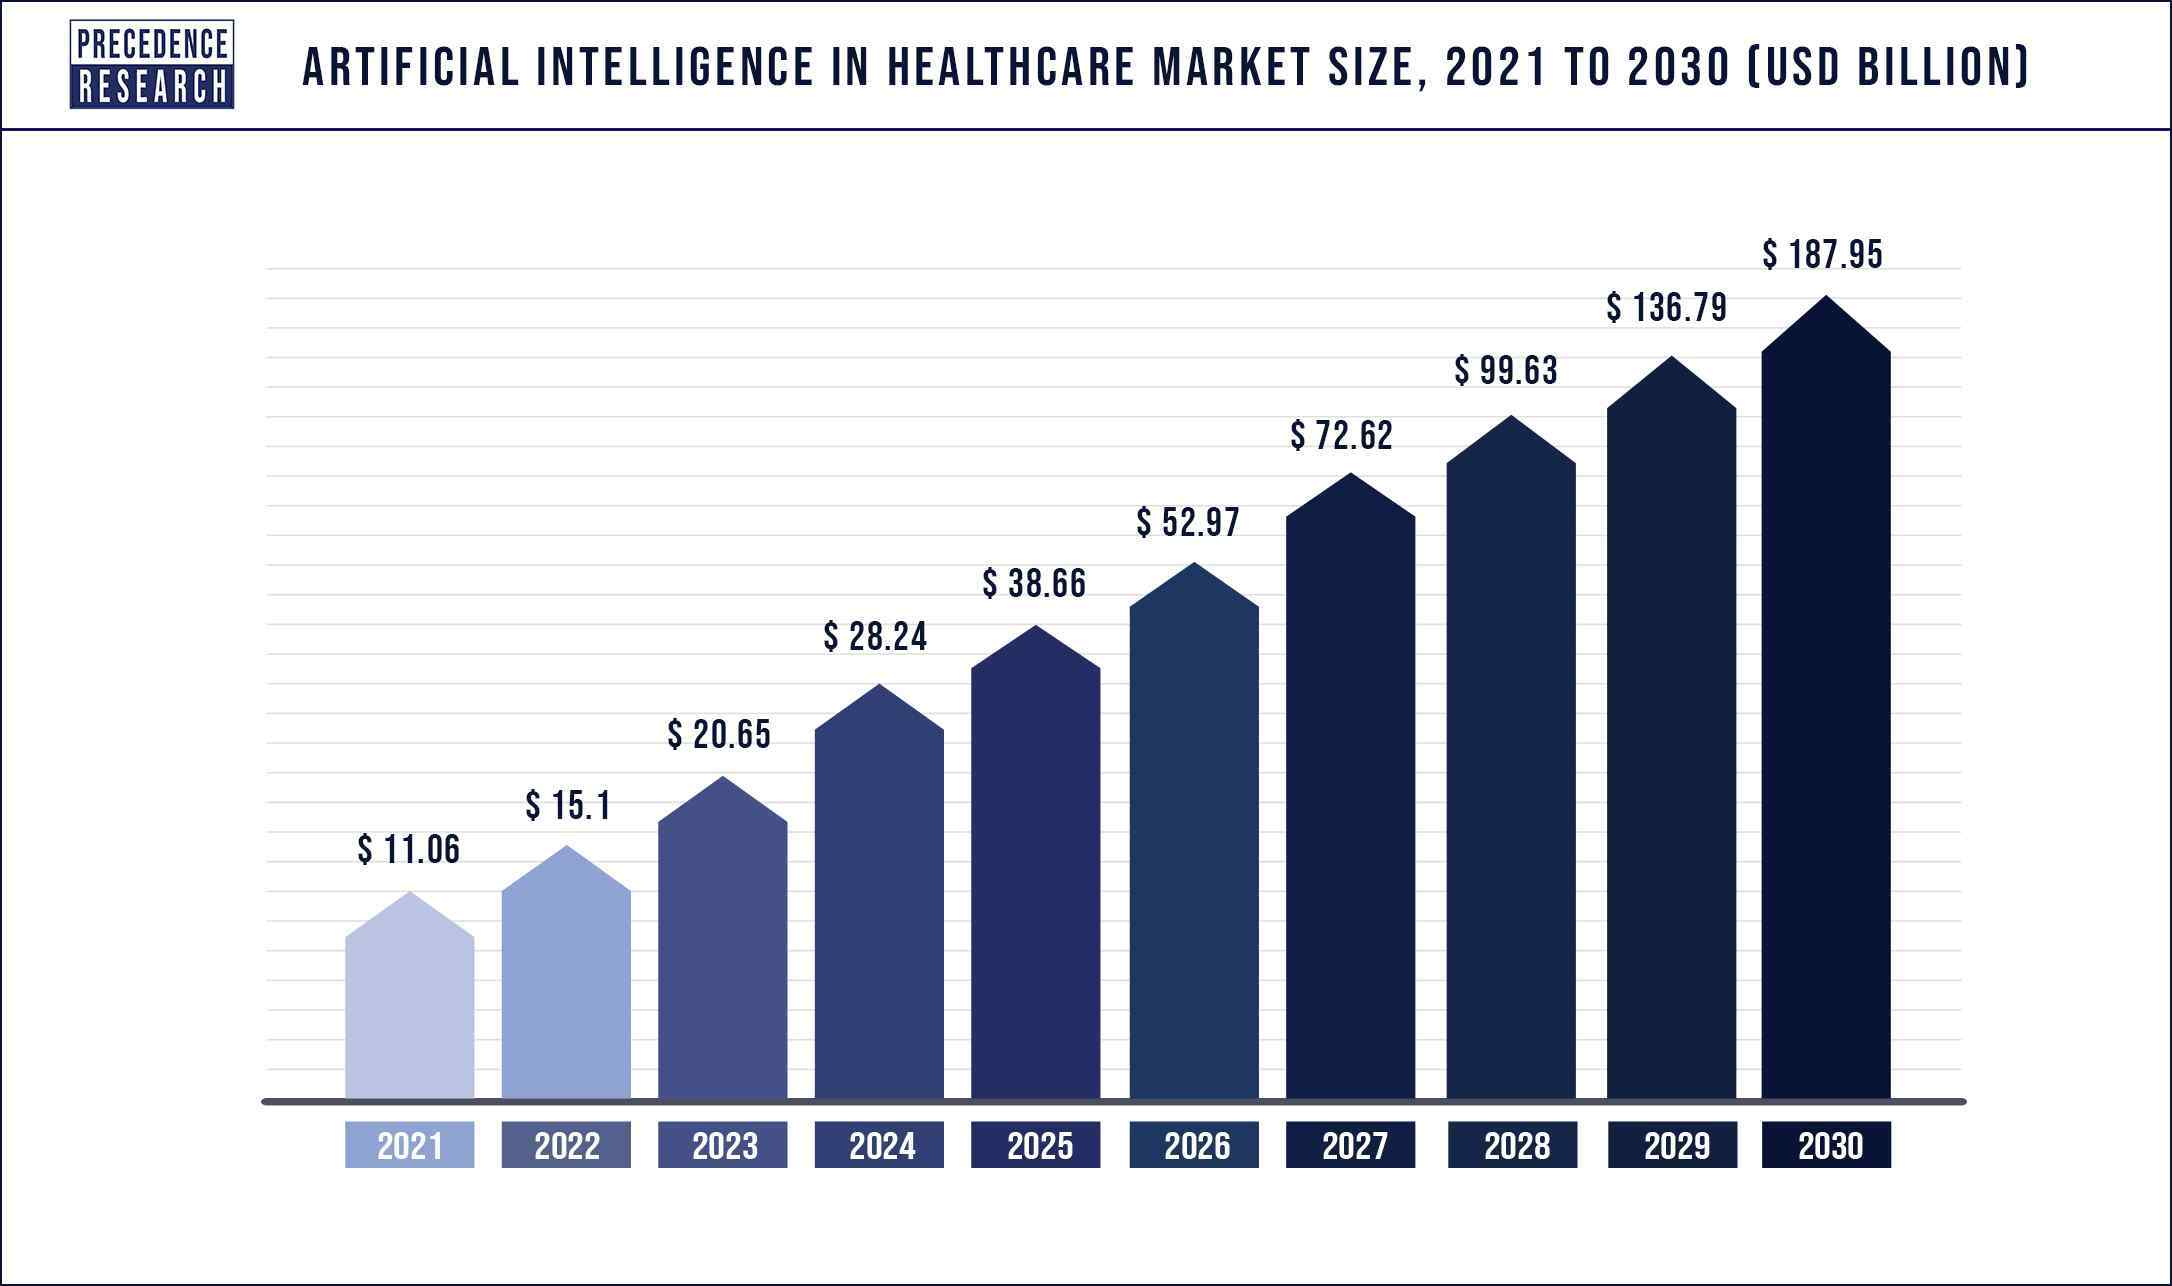 AI in Healthcare Market Size 2021 to 2030